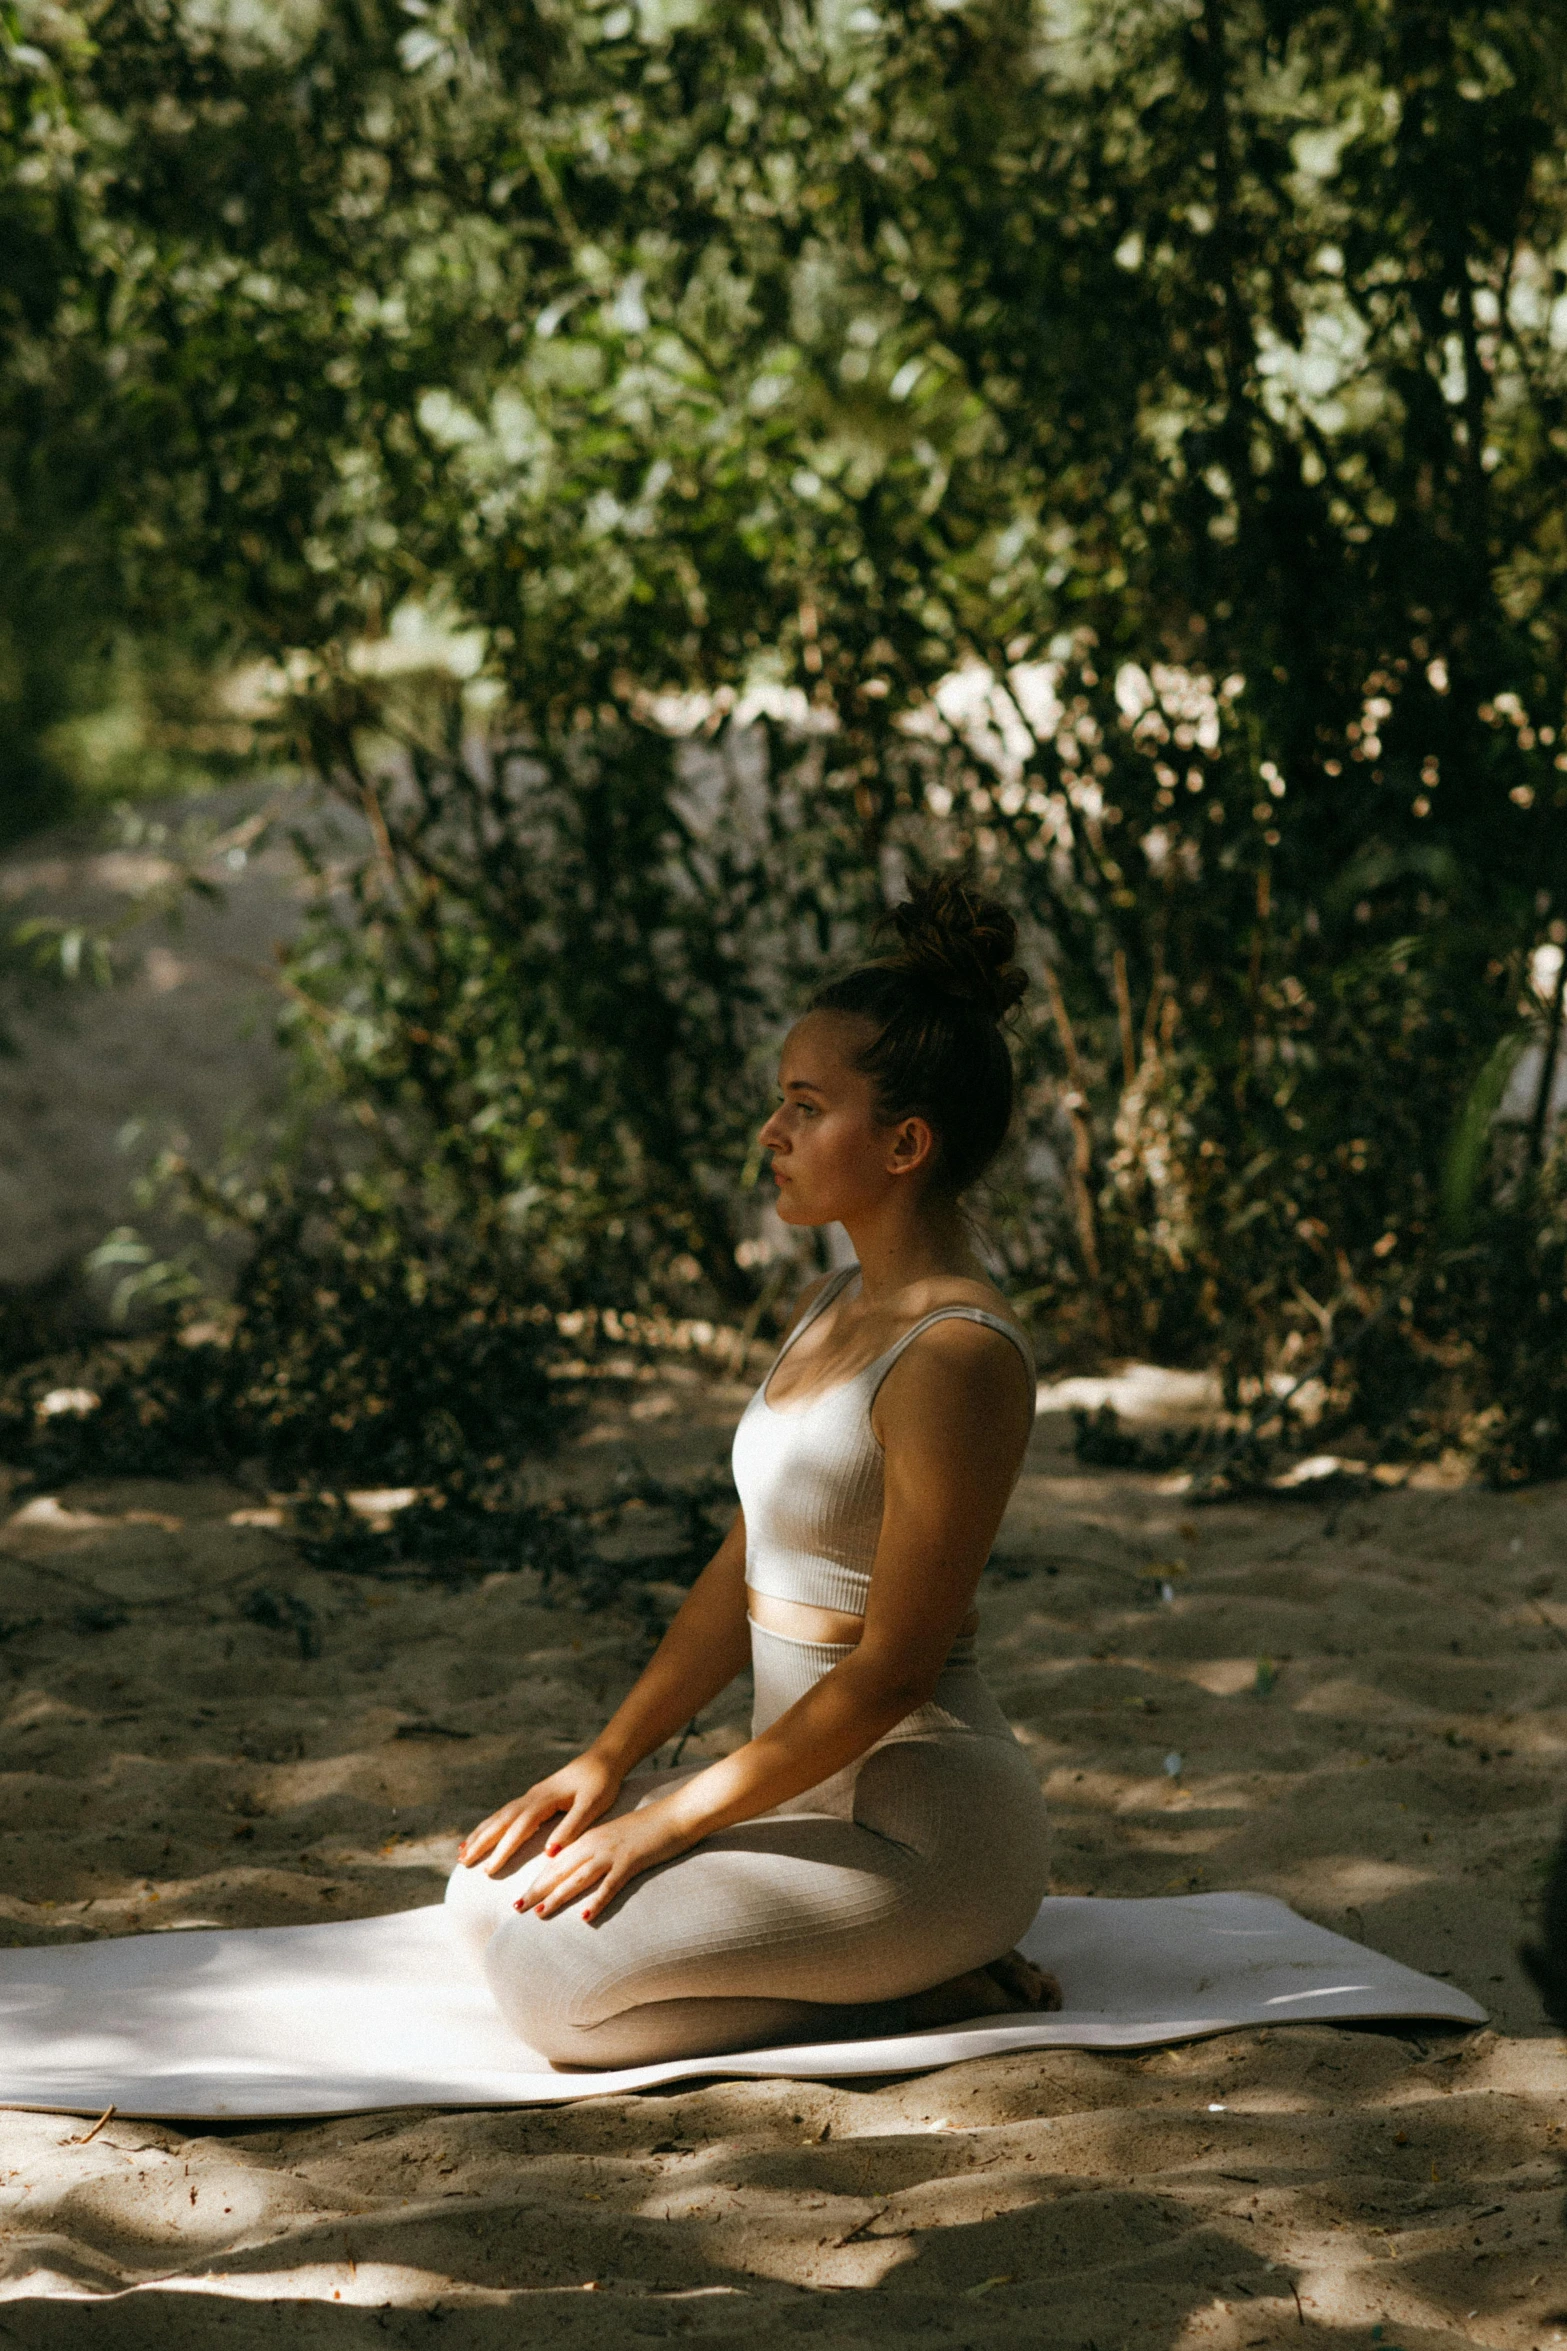 a woman sitting on a blanket in the sand, lush surroundings, yoga pose, bathed in light, cardboard